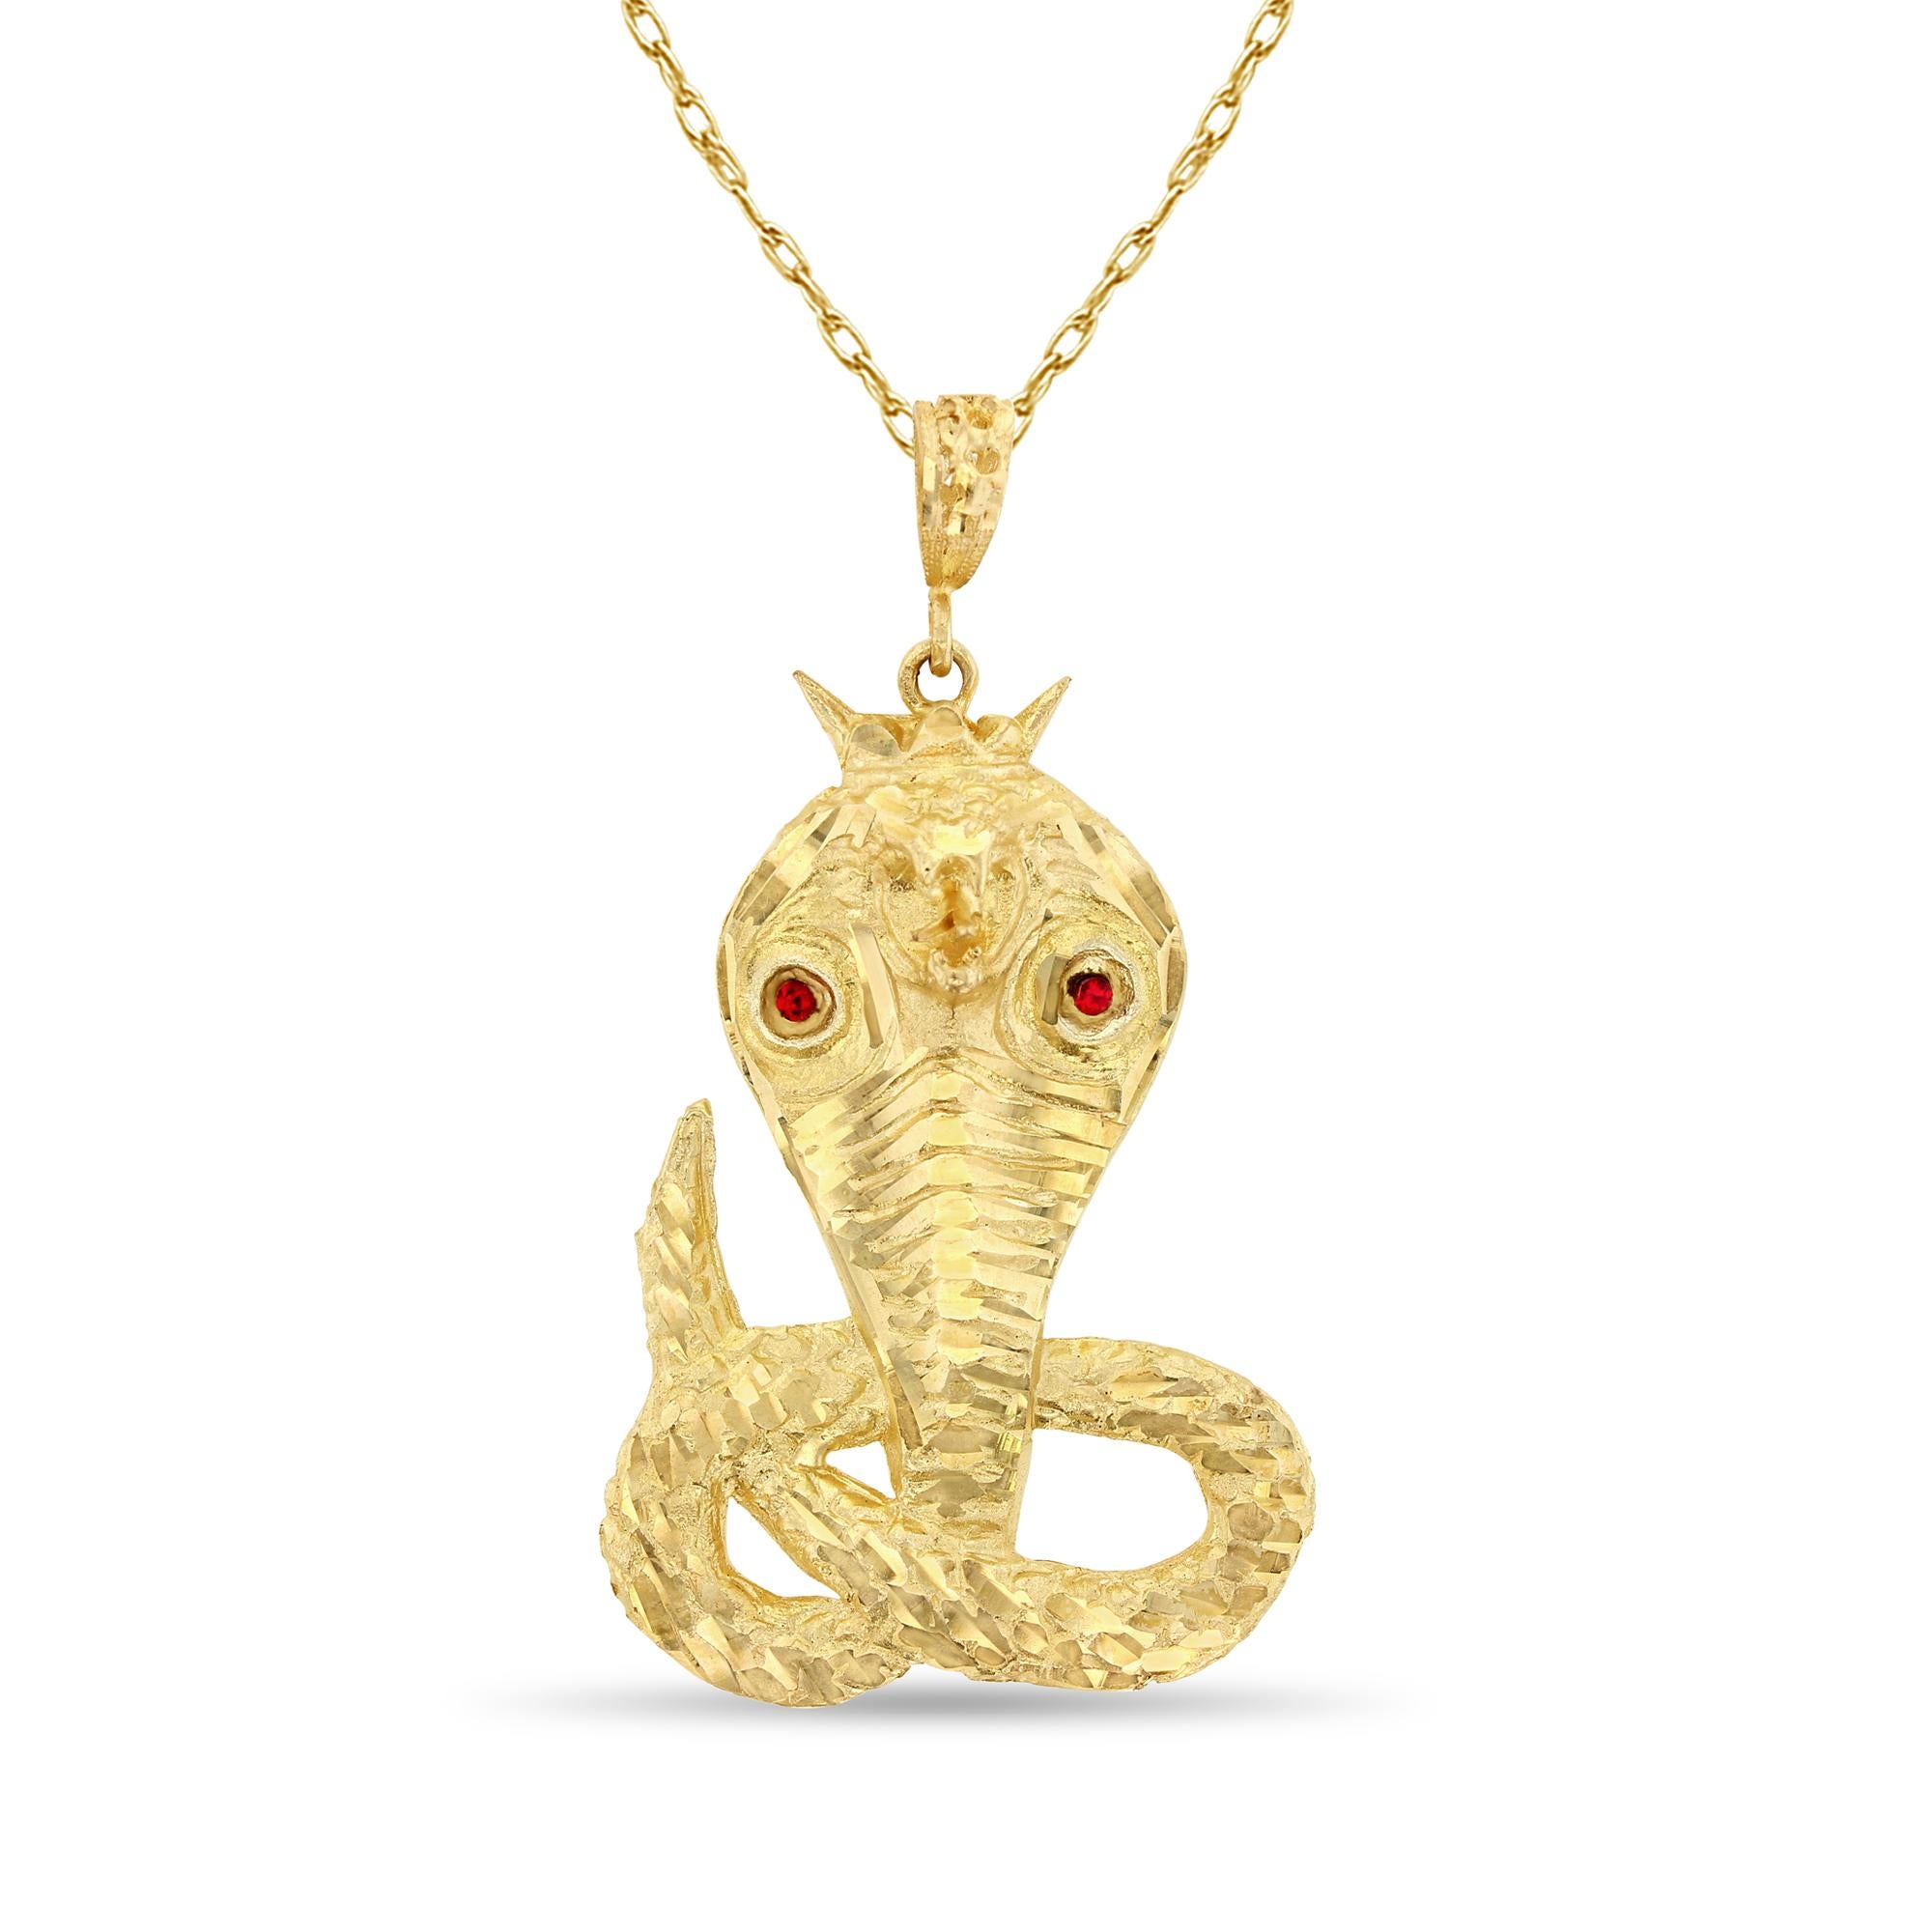 Cobra Snake Gold Necklace with Ruby Accents 10K Yellow Gold In New Condition For Sale In Sugar Land, TX